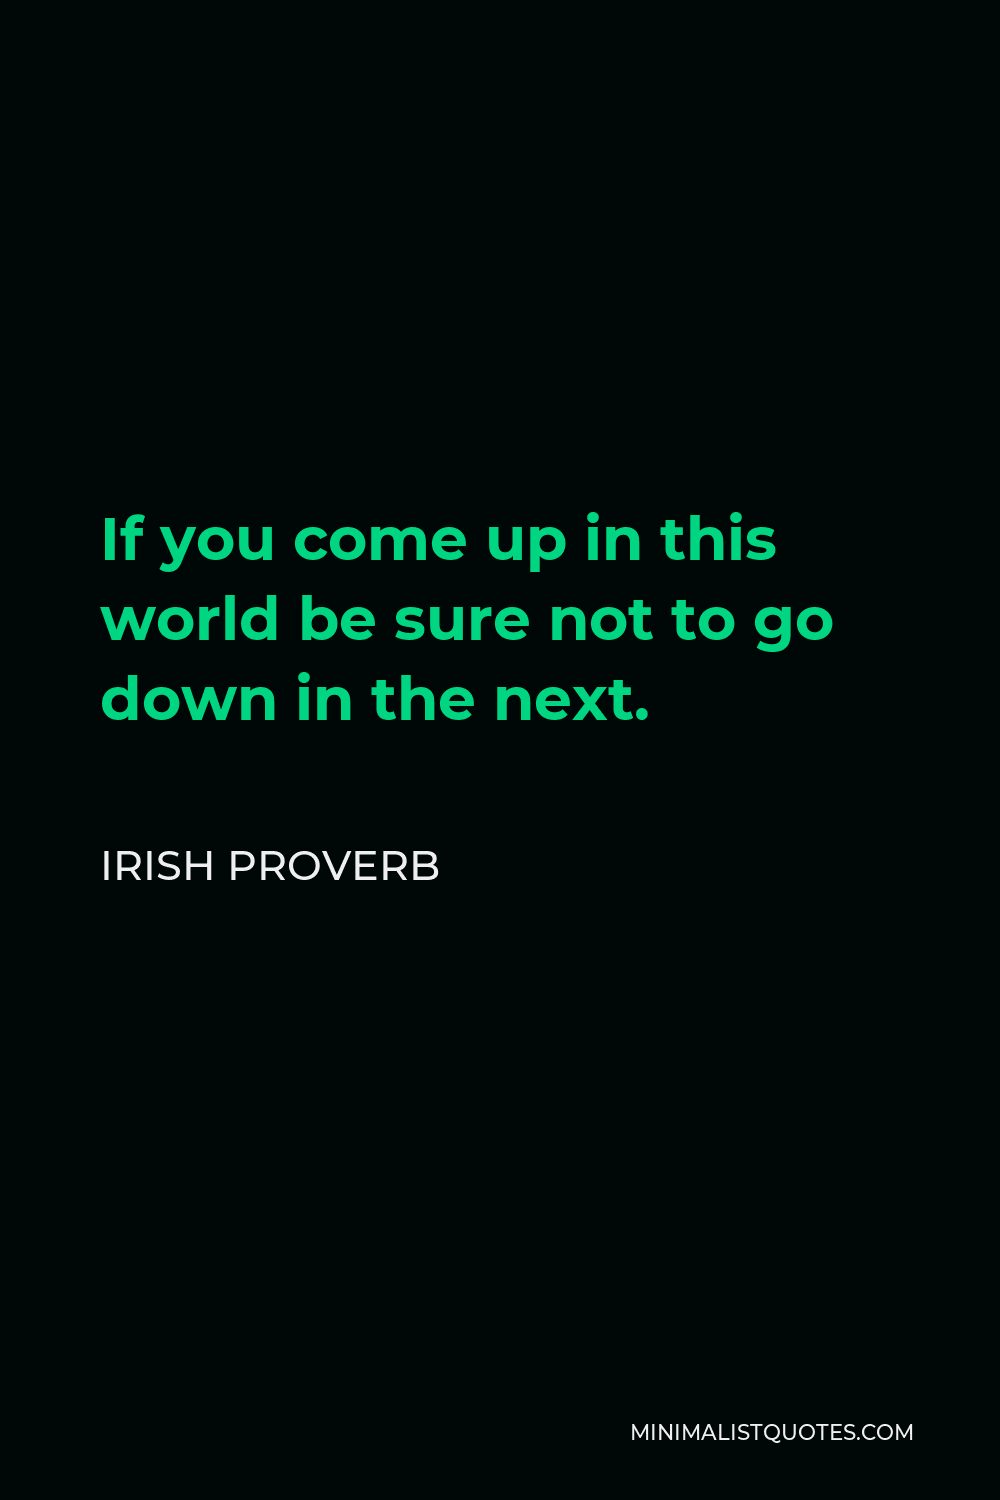 Irish Proverb Quote - If you come up in this world be sure not to go down in the next.